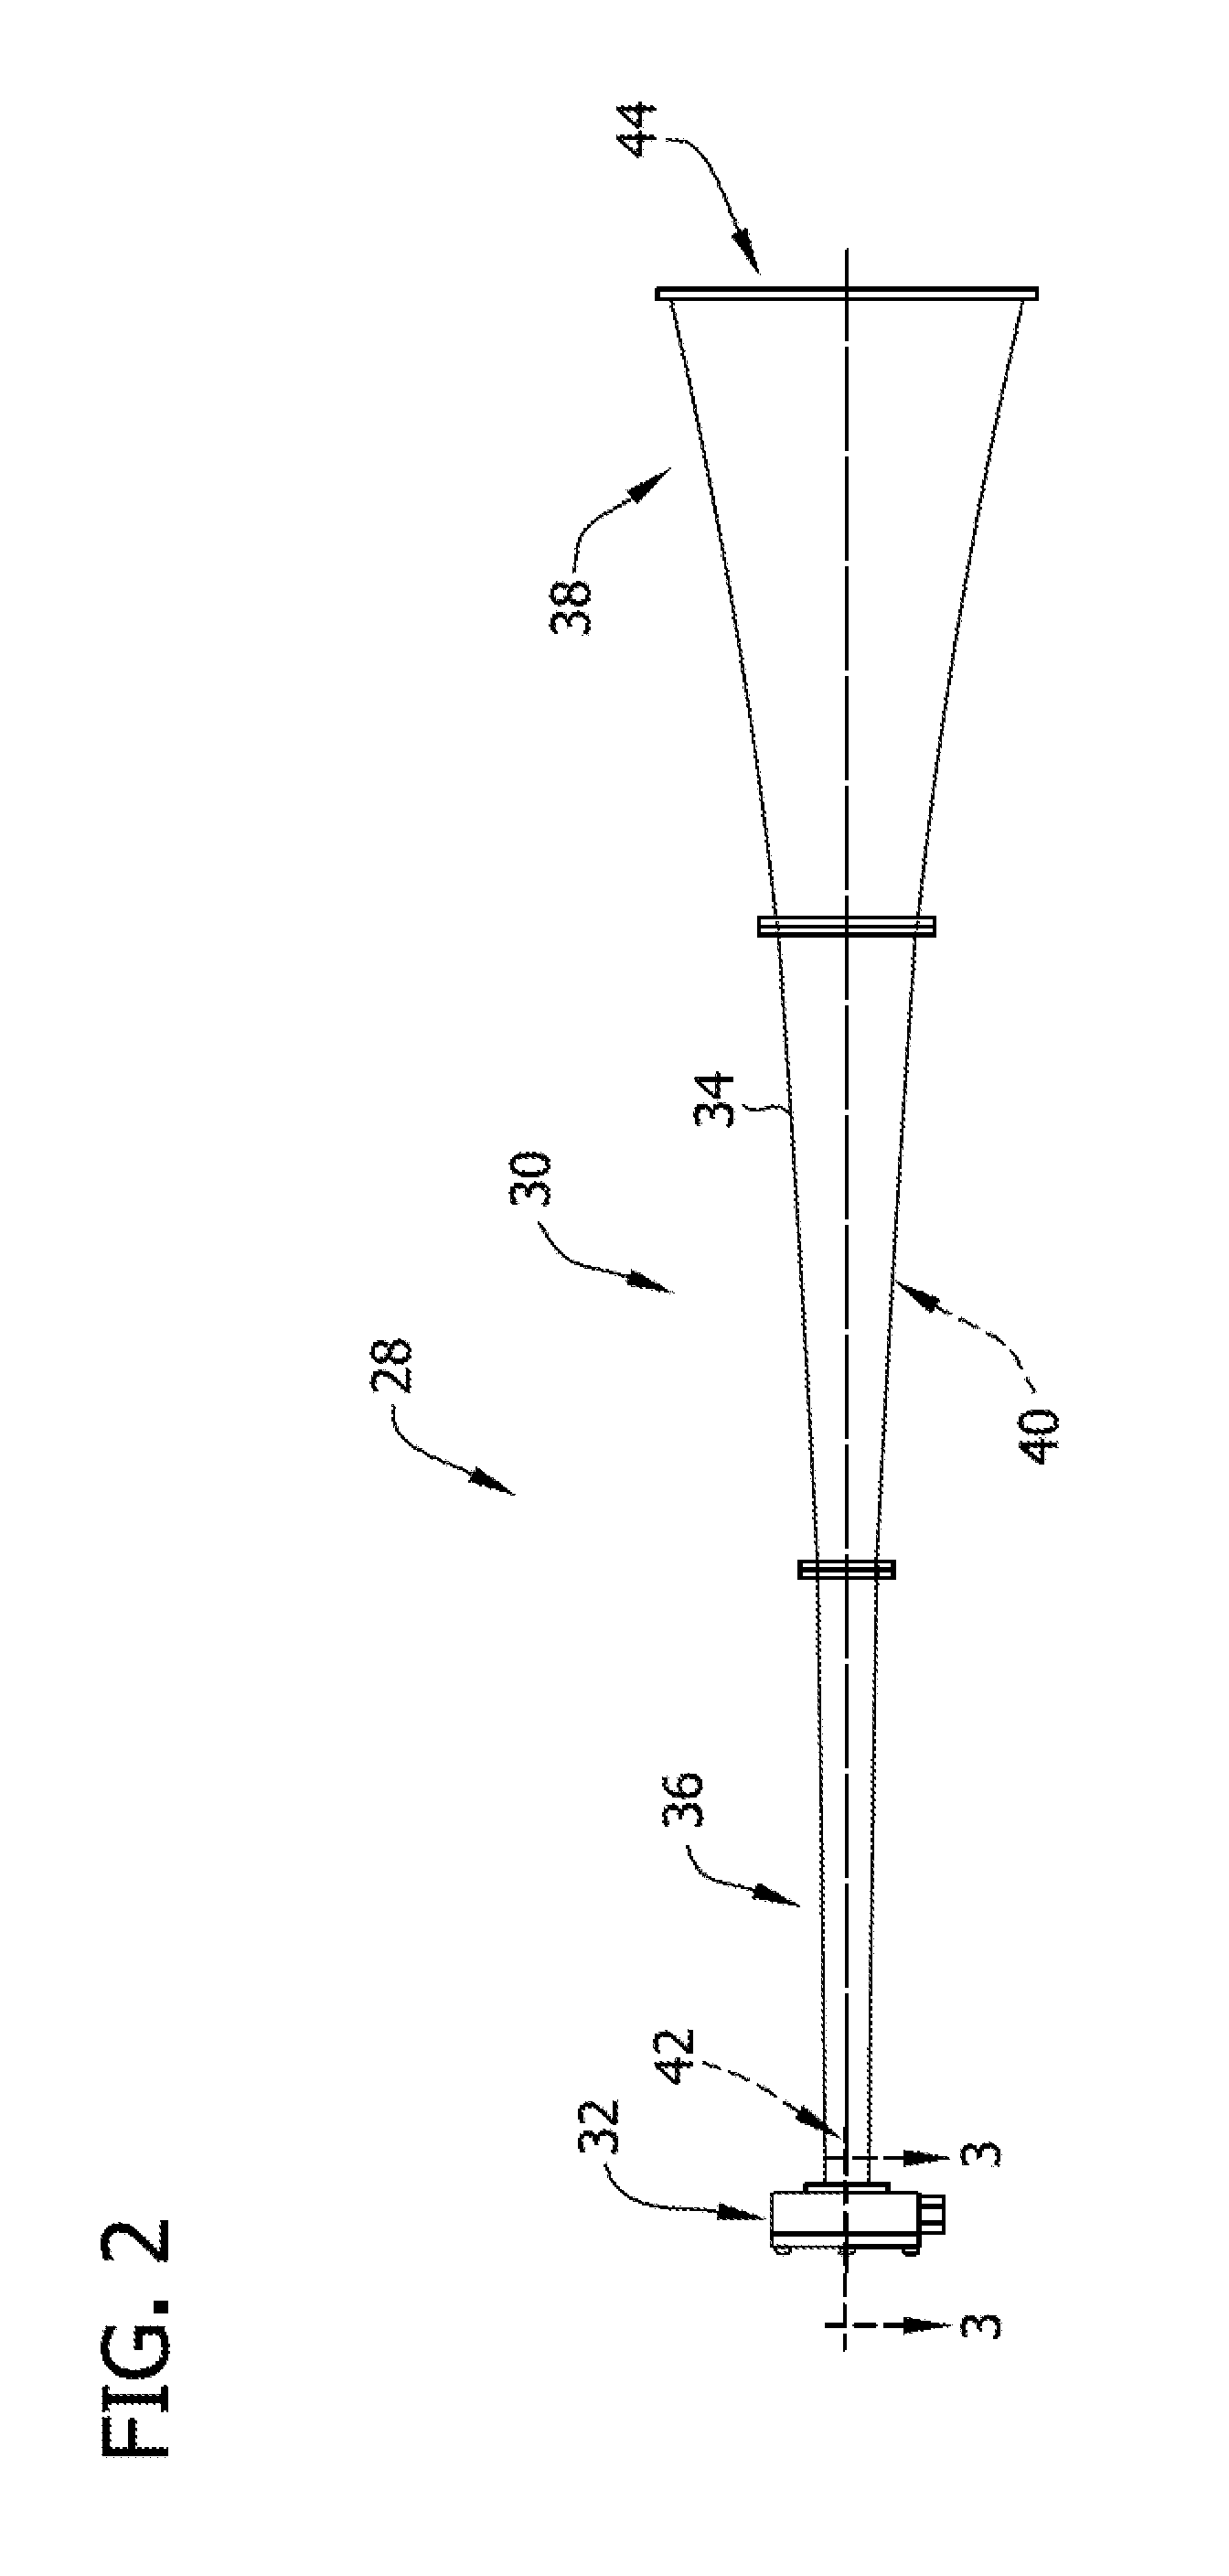 Acoustic cleaning assembly for use in power generation systems and method of assembling same